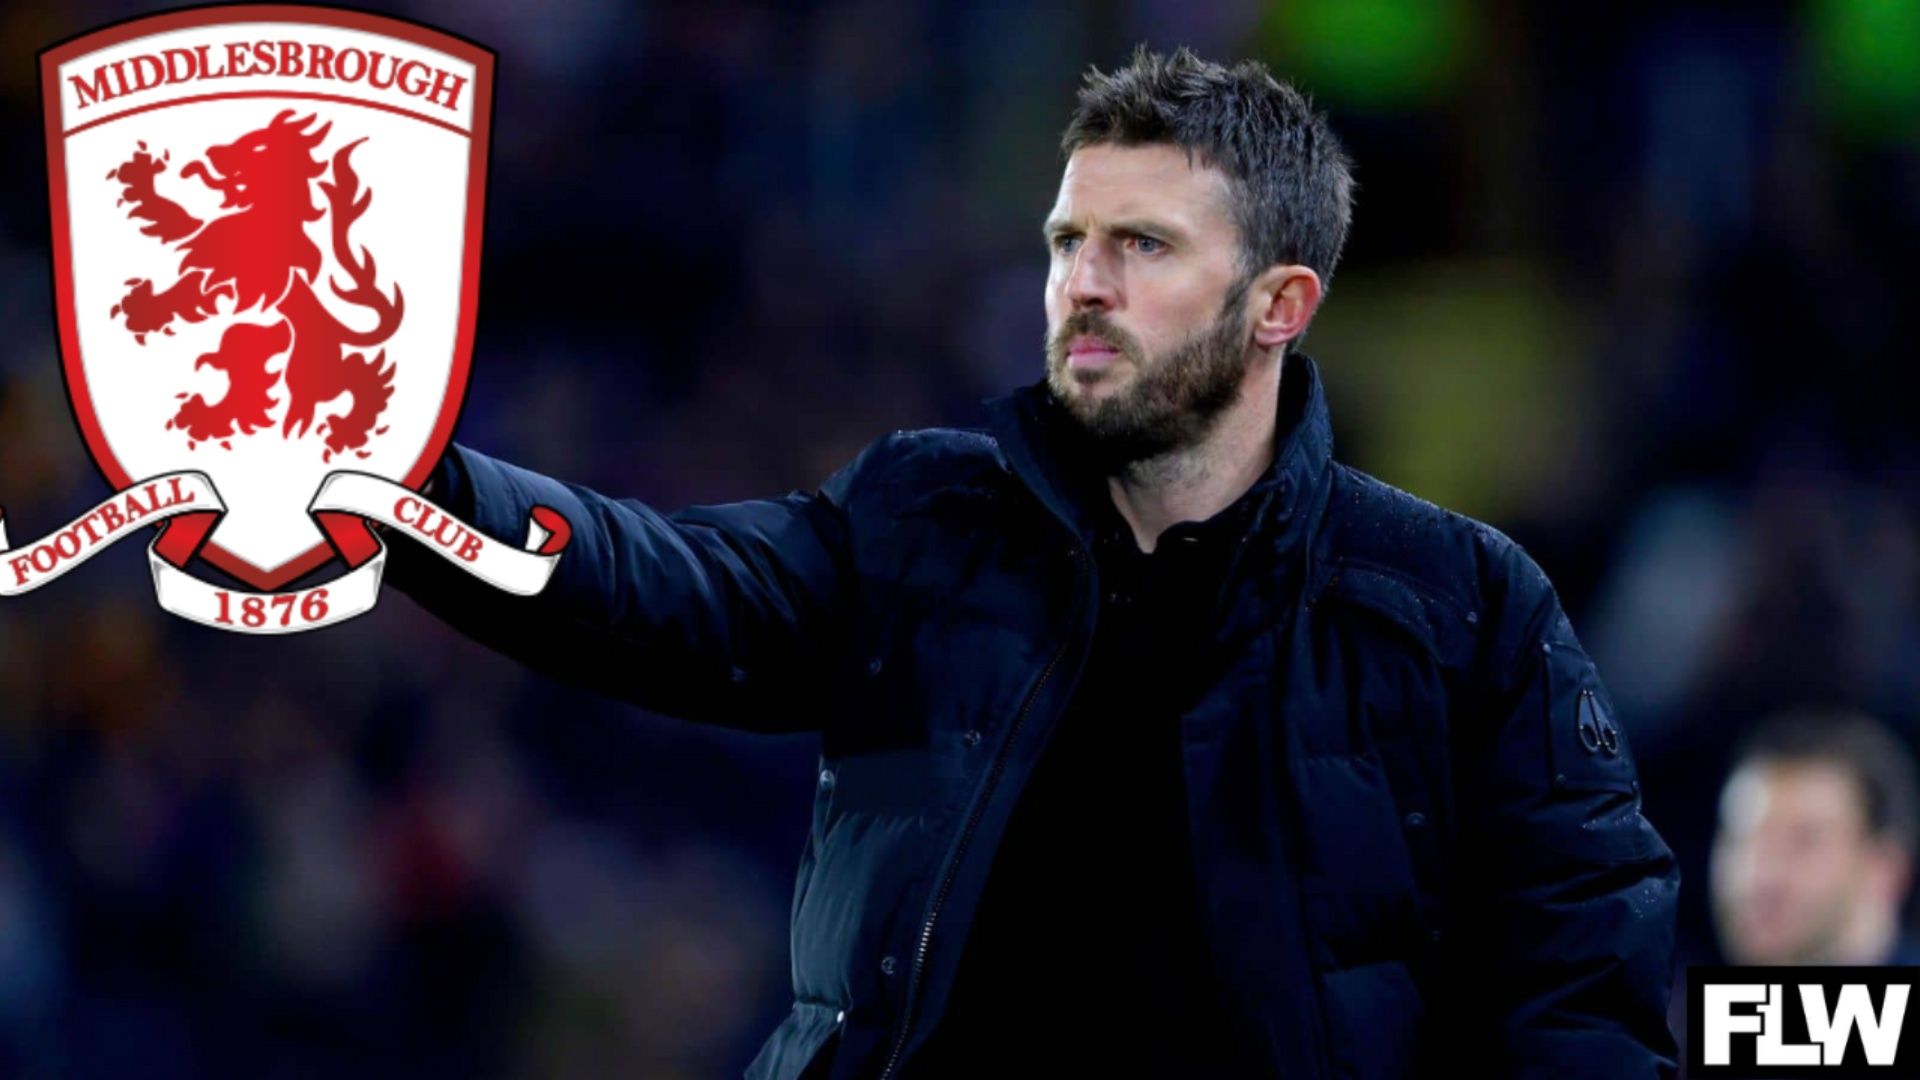 Michael Carrick sends message to his Middlesbrough players ahead of huge Coventry City game